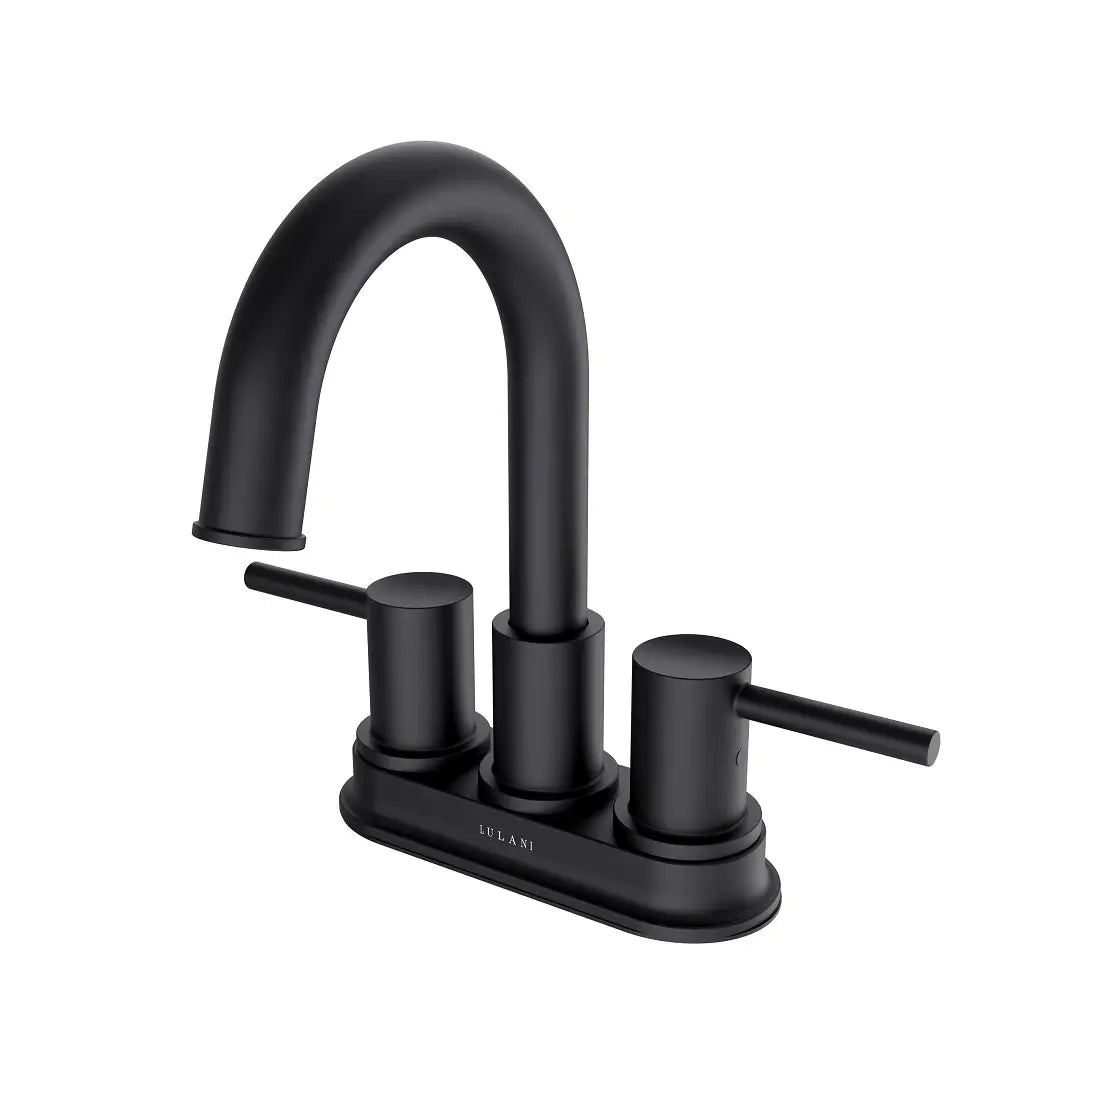 St. Lucia 2 Handle Centerset Brass Bathroom Faucet with drain assembly